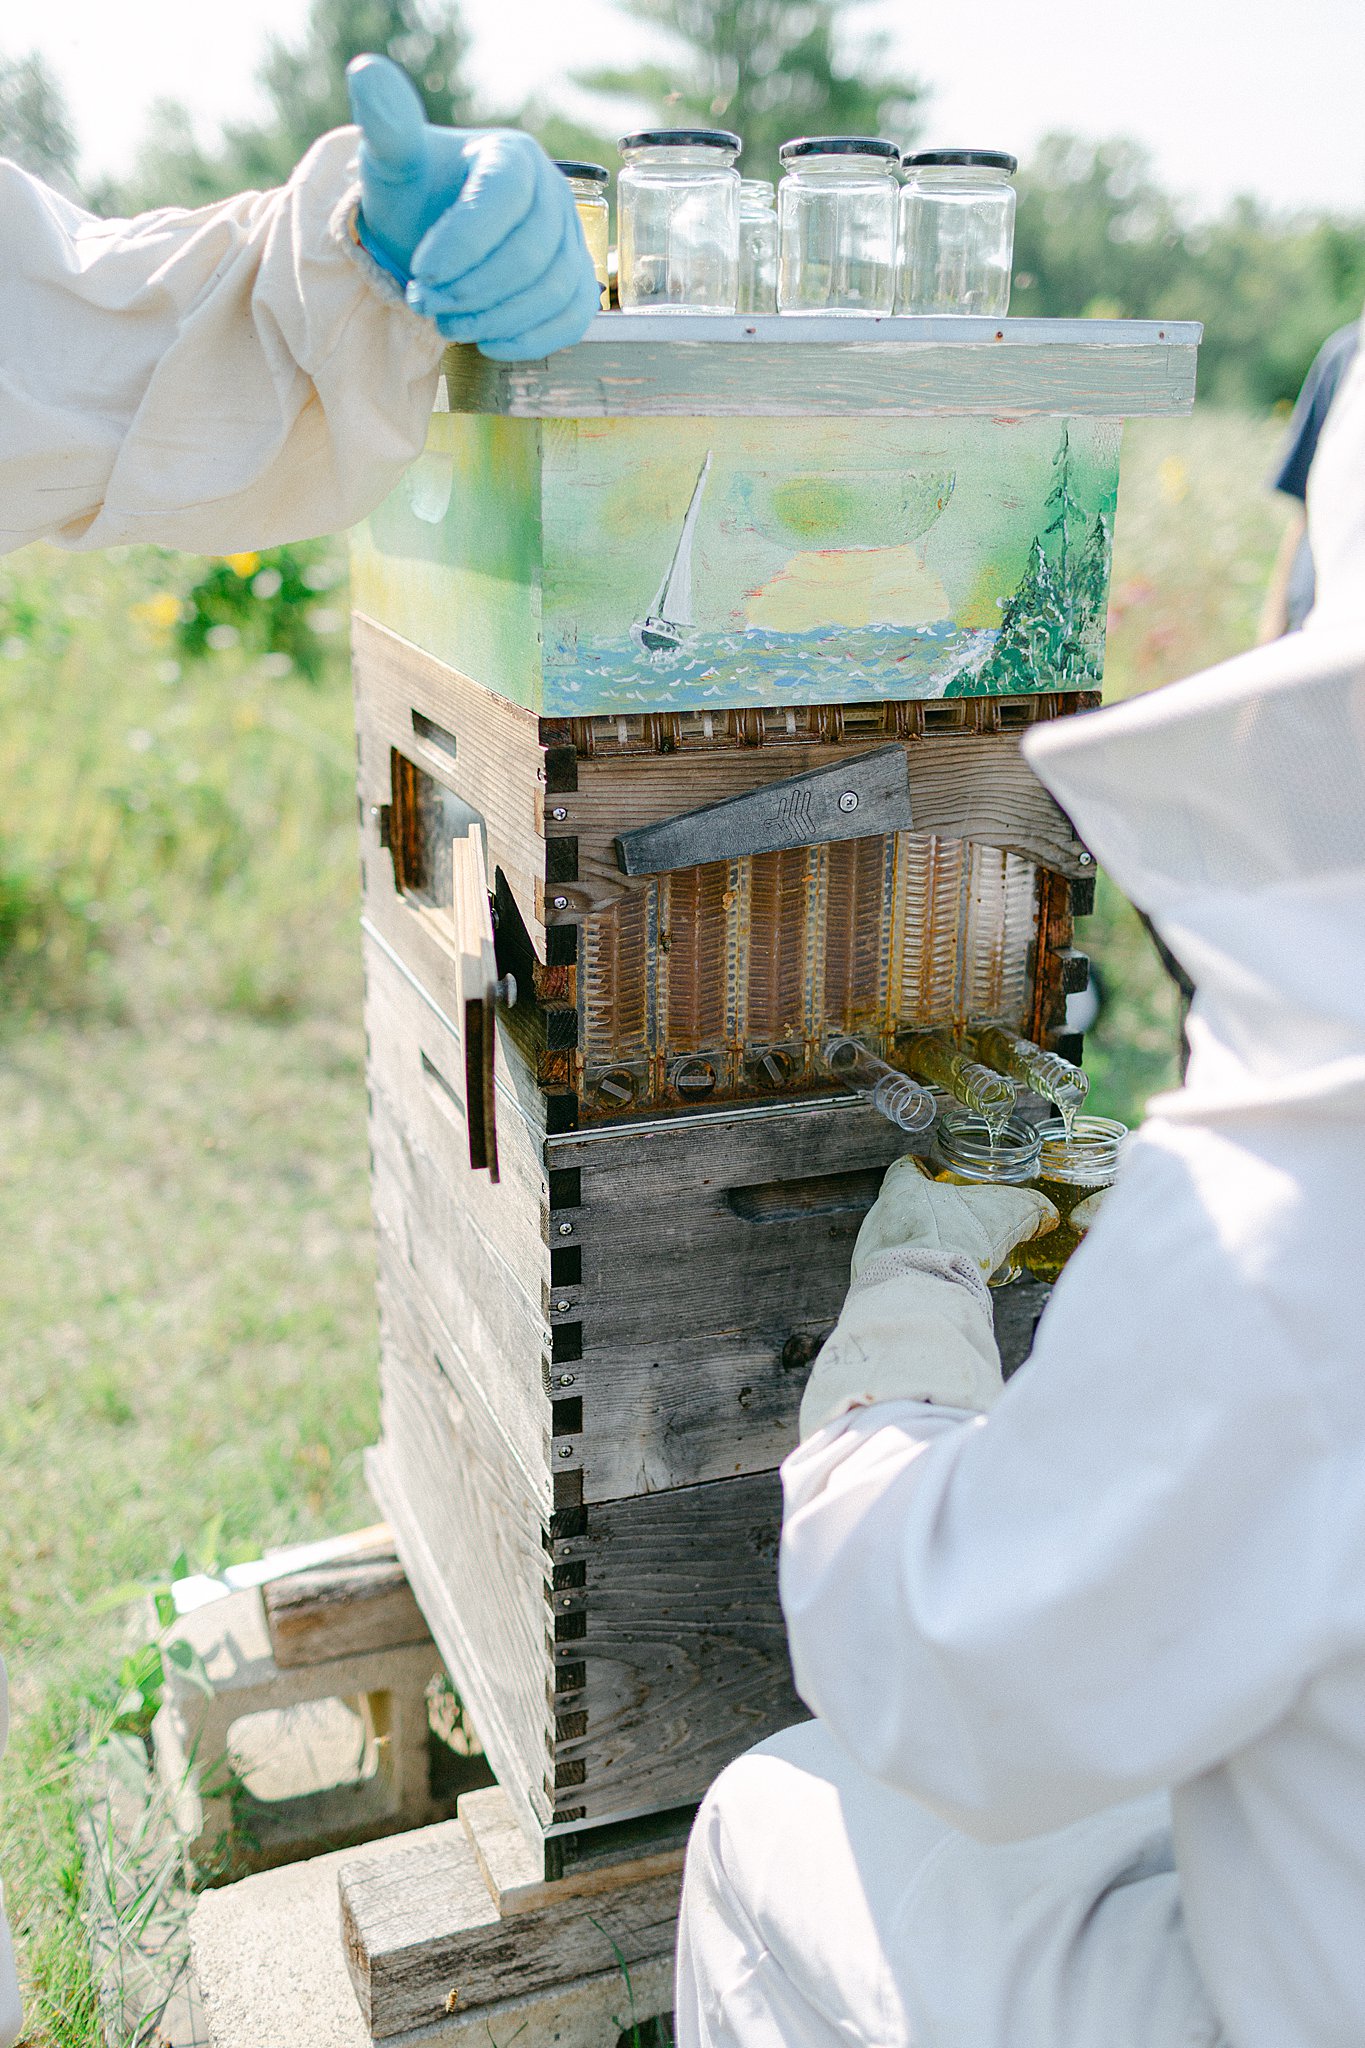 Beekeeper extracting honey from the hive at the Honey Harvest at Crossroads